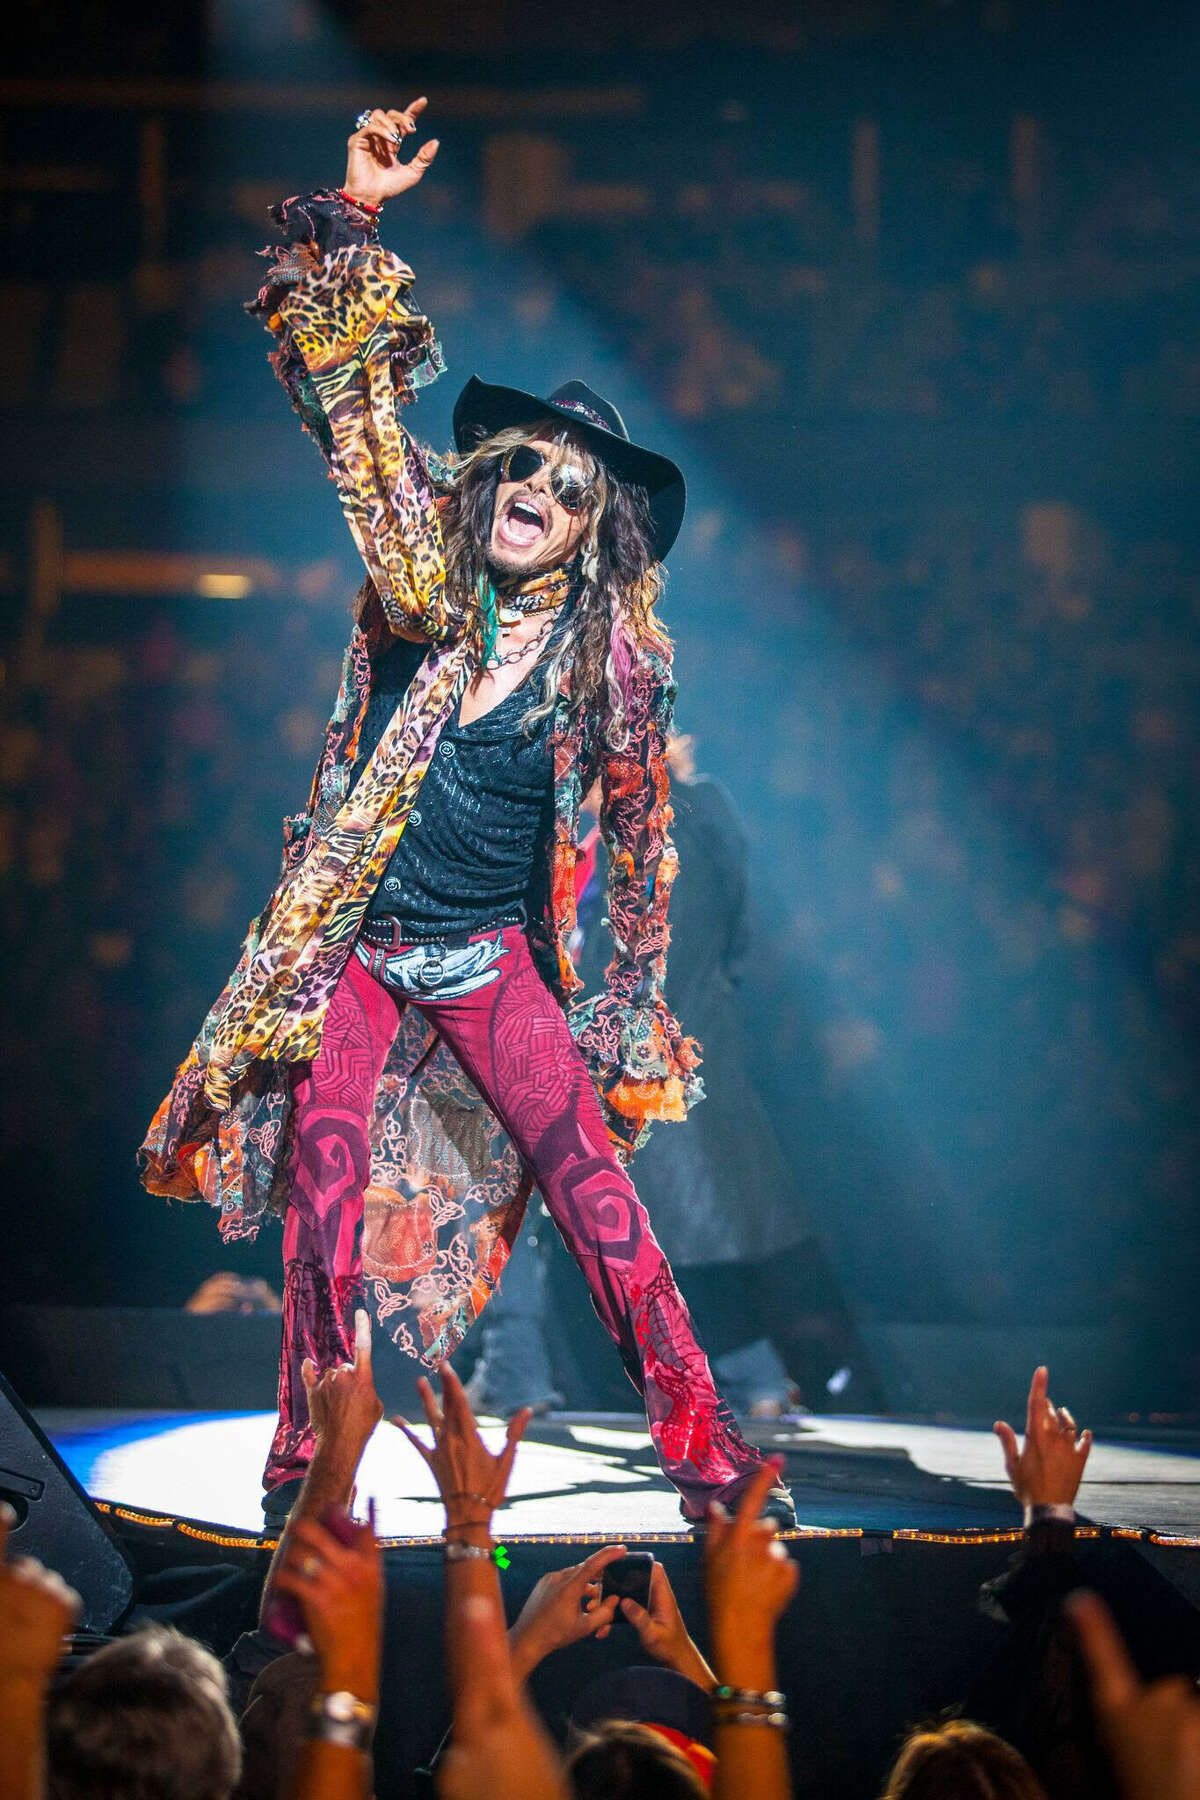 SAN ANTONIO - The Tobin Center for the Performing Arts 4th annual benefit concert gets a wild touch of sweet emotion with Aerosmith frontman Steven Tyler this year. The concert is slated for Nov. 4. It benefits the Tobin's benefit the Tobin Center’s Generation NEXT Education Initiative.   Past headliners have been Paul McCartney, Lionel Richie and Dolly Parton. Nashville's The Loving Mary Band will be performing with Tyler. Tickets available online at www.tobincenter.org, by phone 210-223-8624 and at the Tobin Center box office, 100 Auditorium Circle.  Box office hours are 10 a.m.-6 p.m. Monday-Friday; and 10 a.m.-2 p.m. Saturday,  Tickets are $100, $165, $265, $375, $650 and $1,000.  Tyler, one of rock's most colorful characters, is the voice of such hits as "Dream On," "Walk This Way," "Sweet Emotion" and "Back in the Saddle." Hsaldana@express-news.net